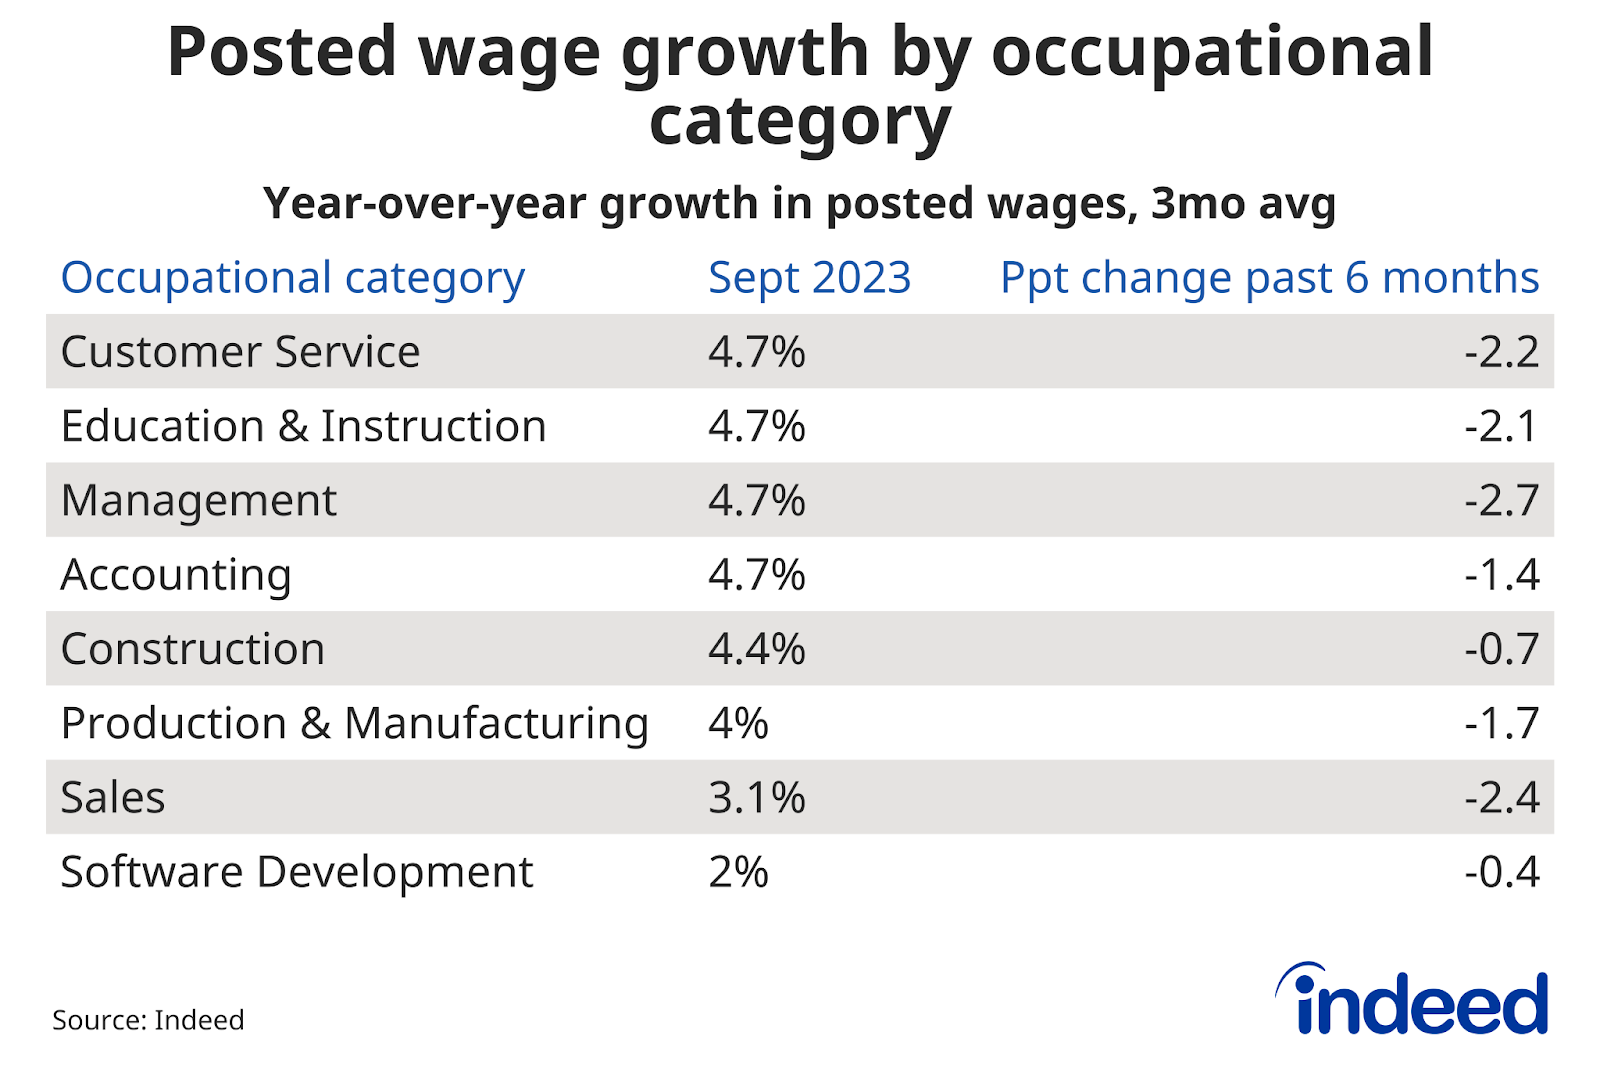 Table titled "Posted wage growth by occupational category," shows the year-over-year percent change in posted wages as of Sept 2023, and the percentage point change in the past six months, by job category. Production & Manufacturing and Software Development wages are growing at 4% and 2%, respectively, year-over-year. 